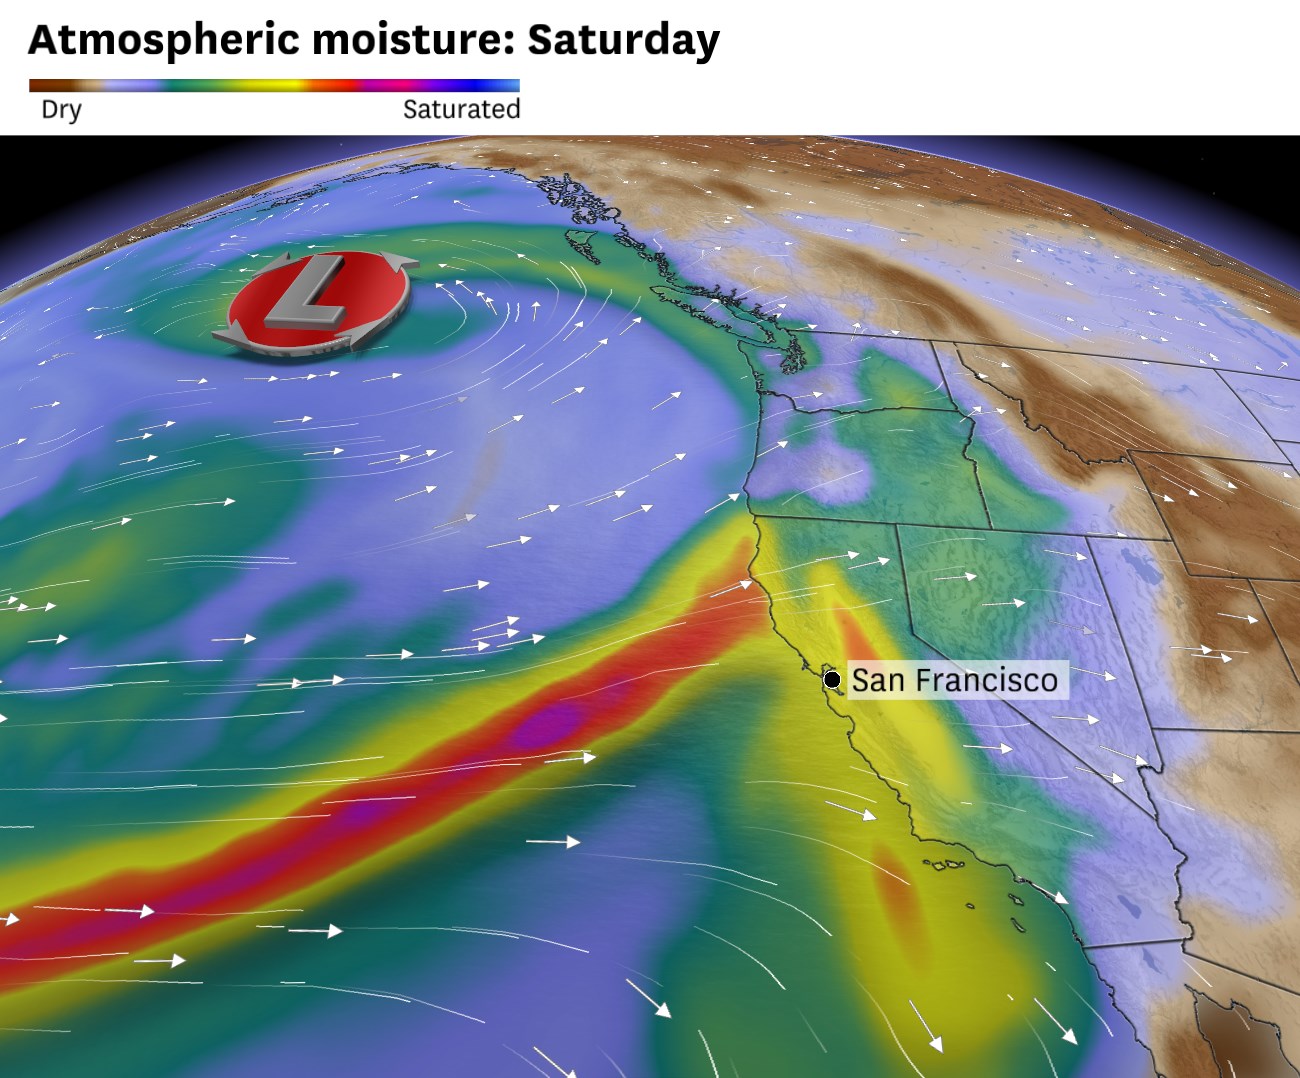 A strong jet stream will bring stormy weather to Northern California